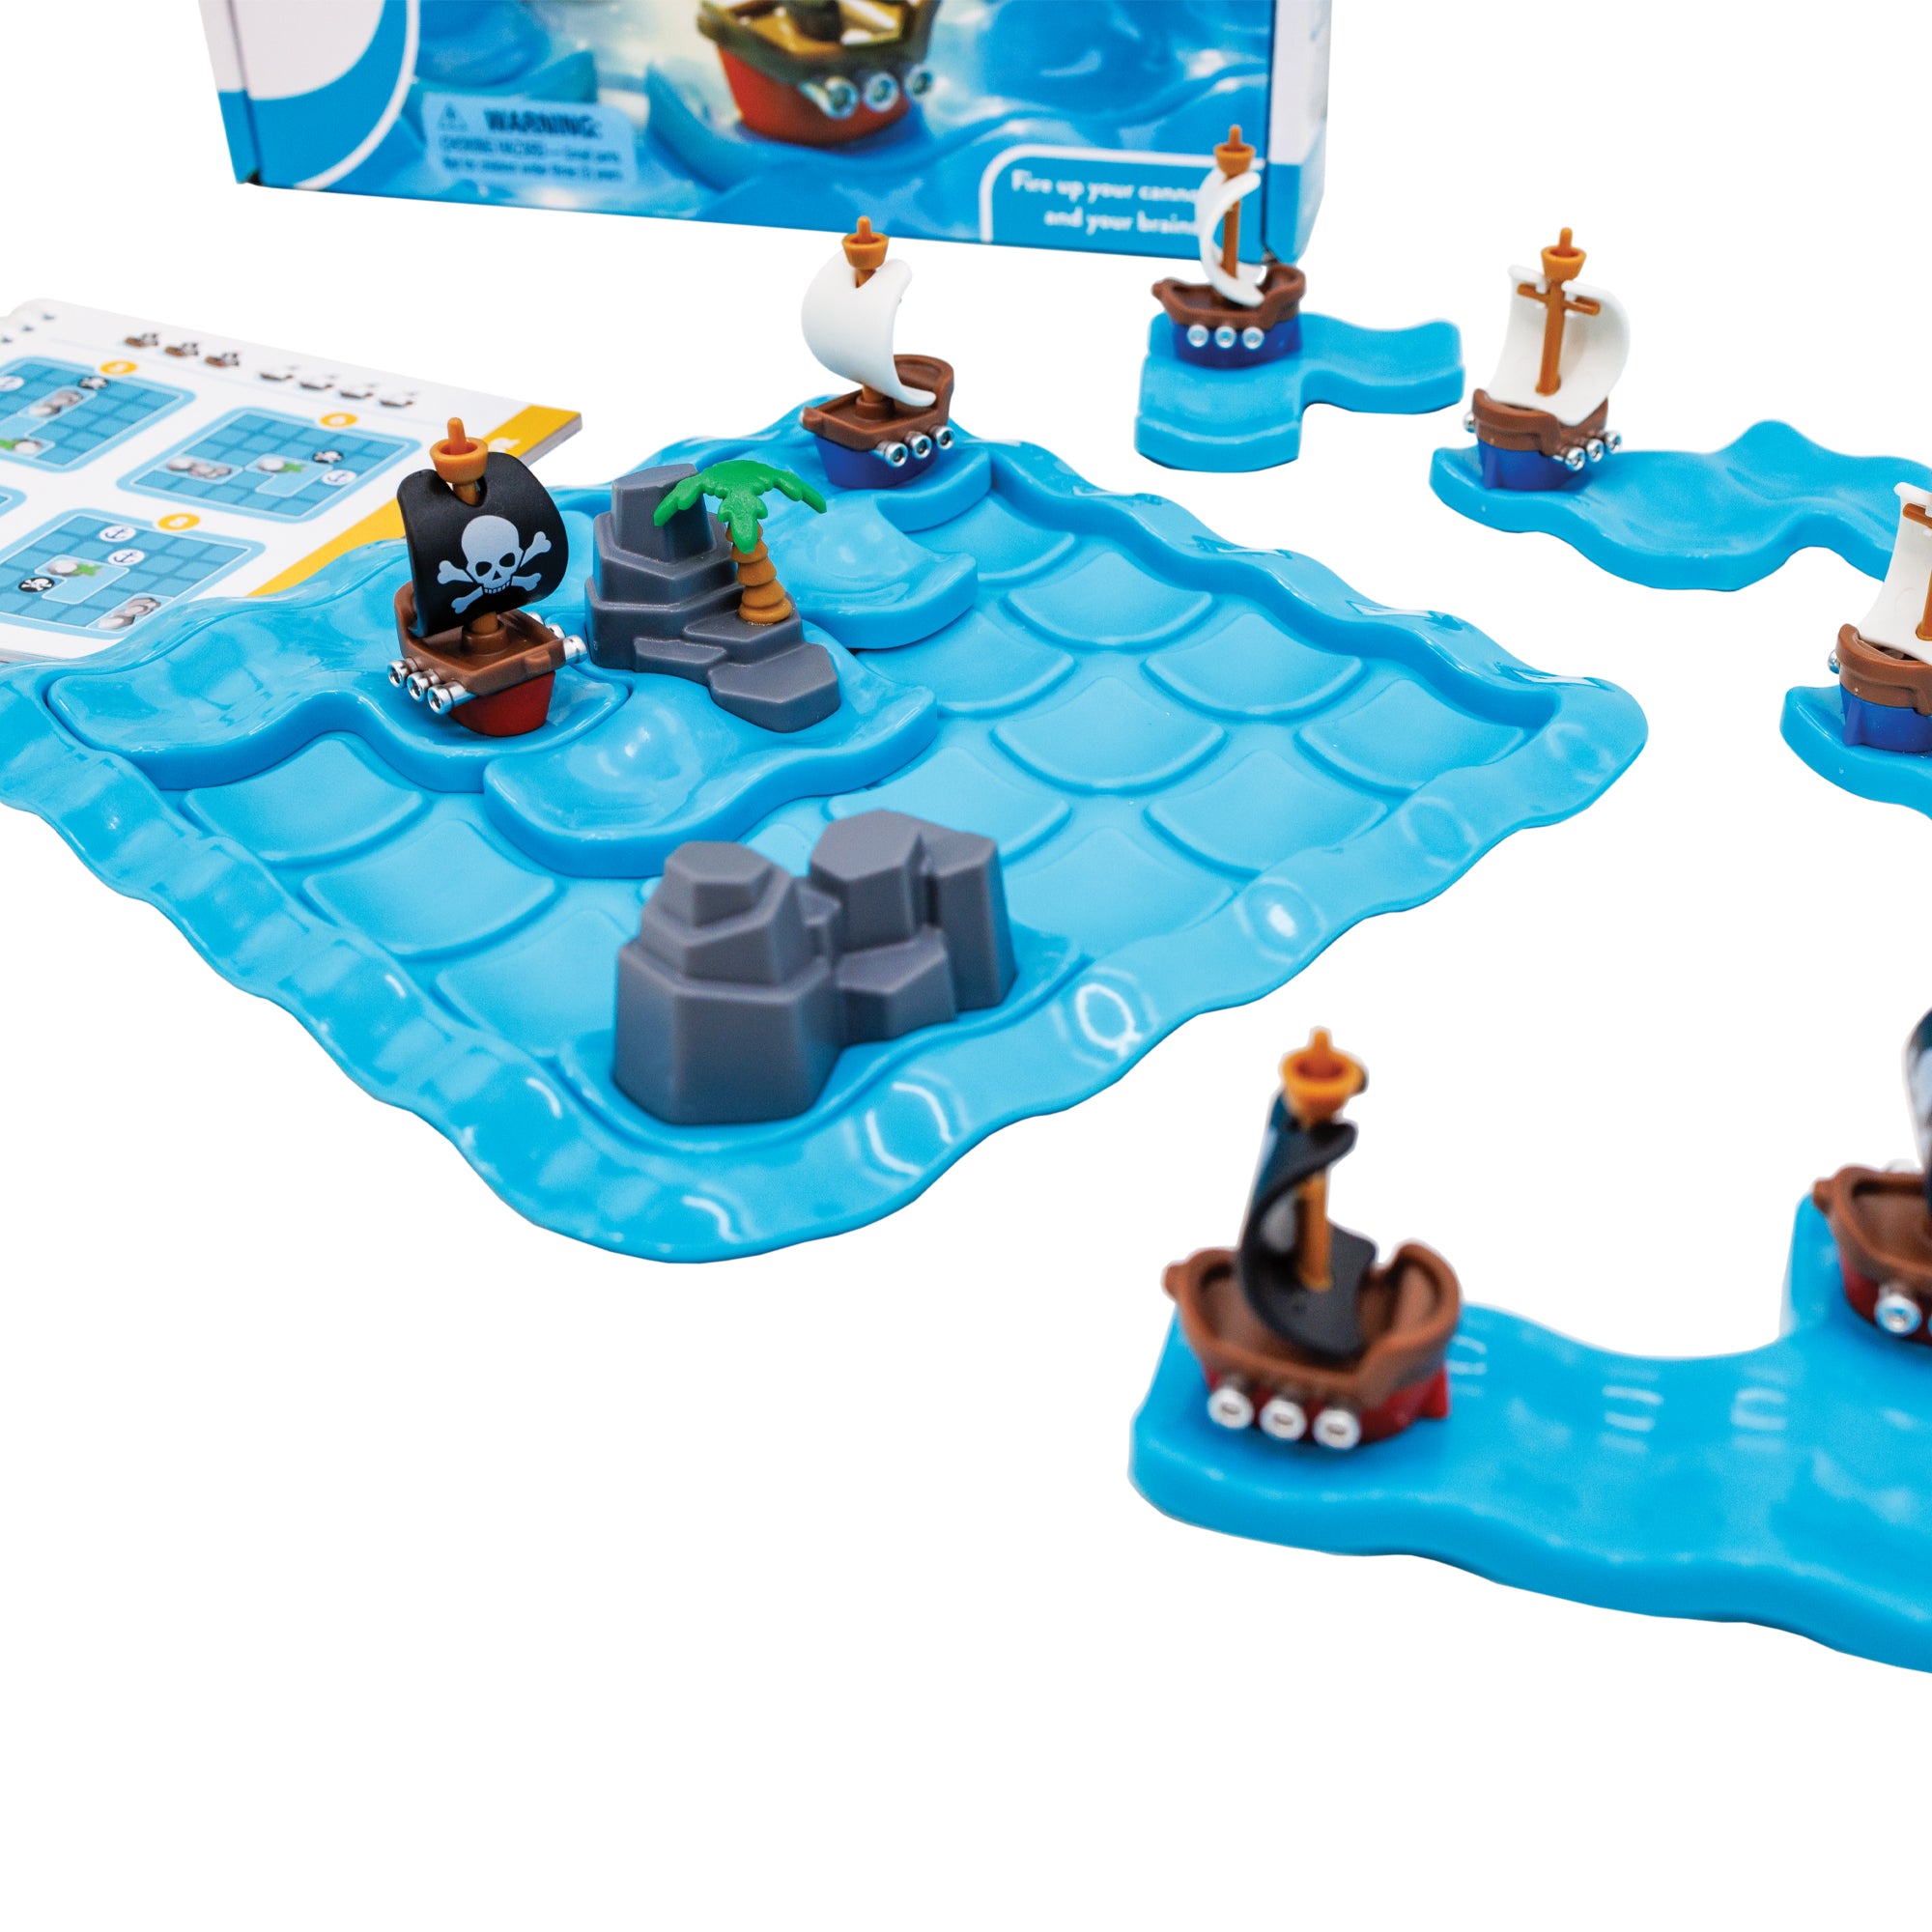 The Pirates Crossfire game. The gameboard is blue and there are 3 pieces set in place on the board; one ship with a white skull on a black sail, a rock piece, and another rock piece with a palm tree. You can see 4 ship pieces off to the right and the instruction book off to the left. You can see the bottom of the game box in the background, out of focus.